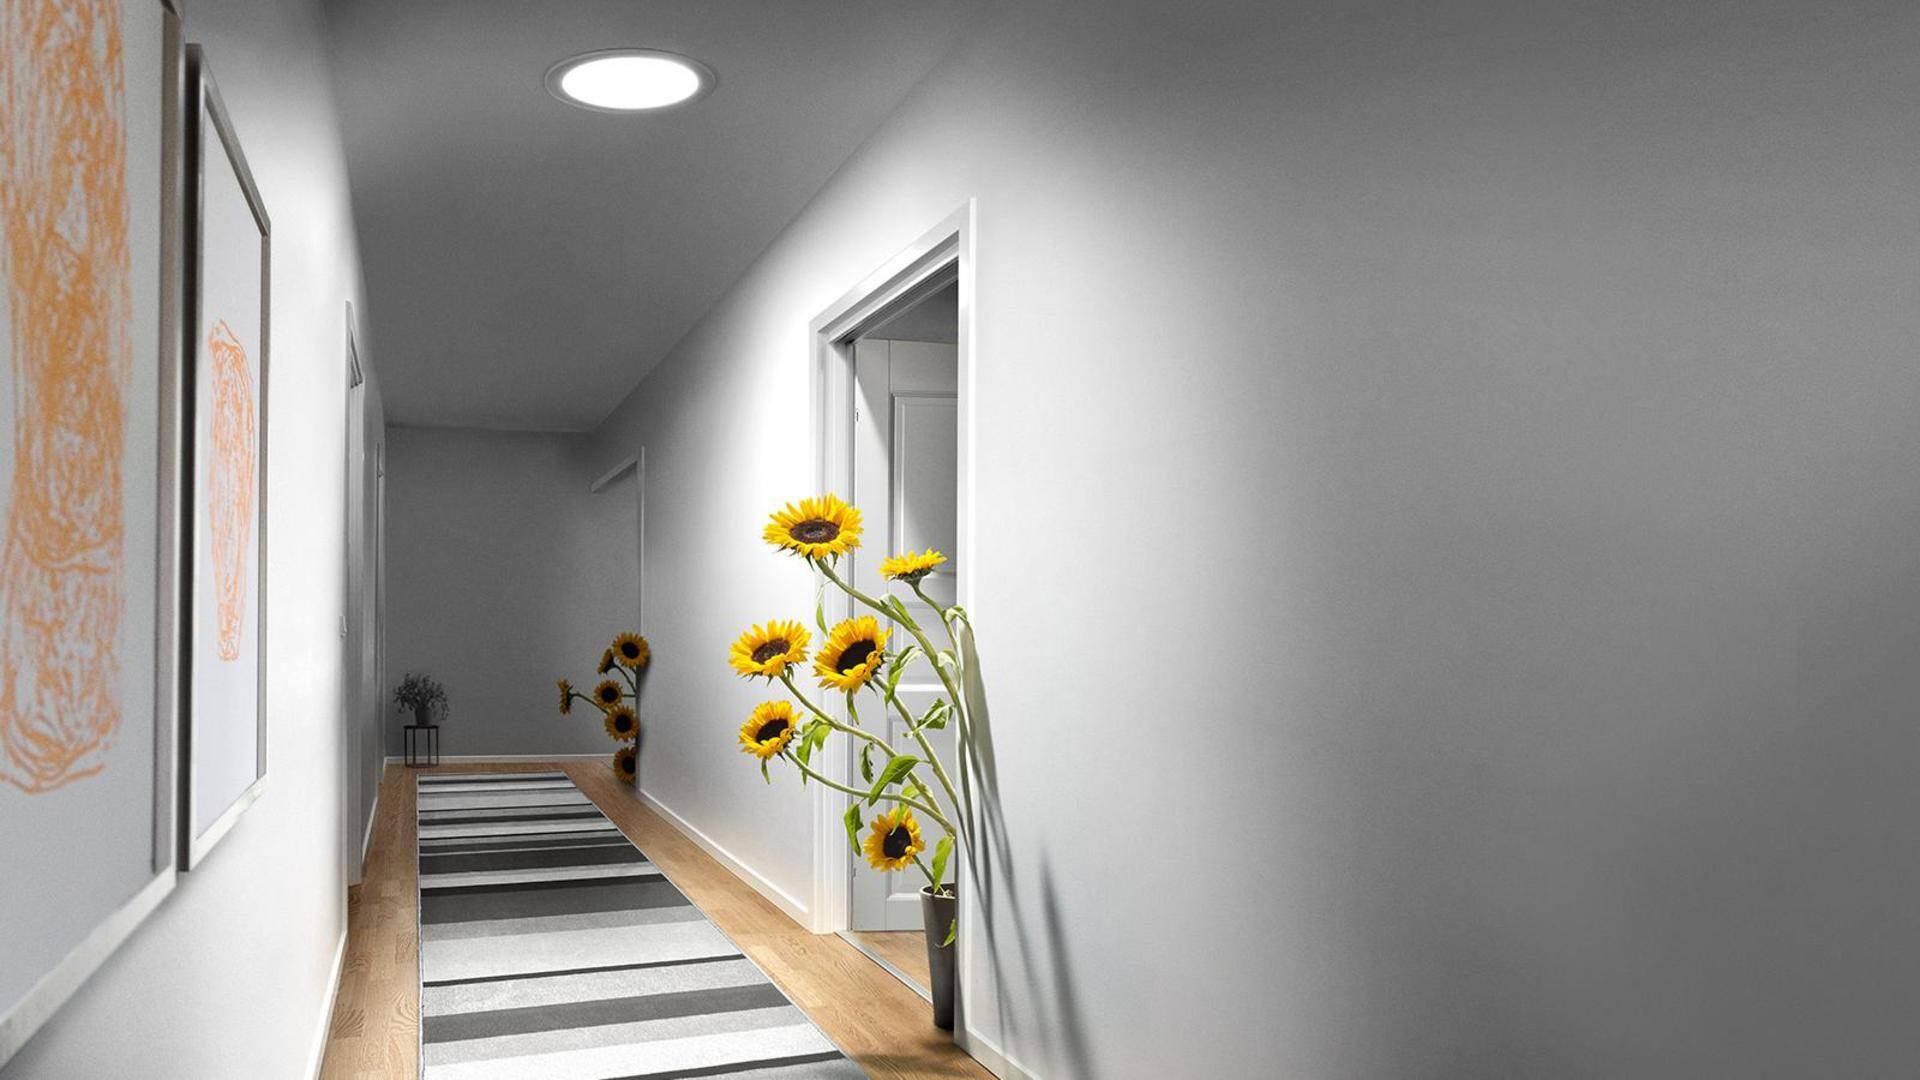 Sun tunnels: Lighting up darkest corners of your home naturally